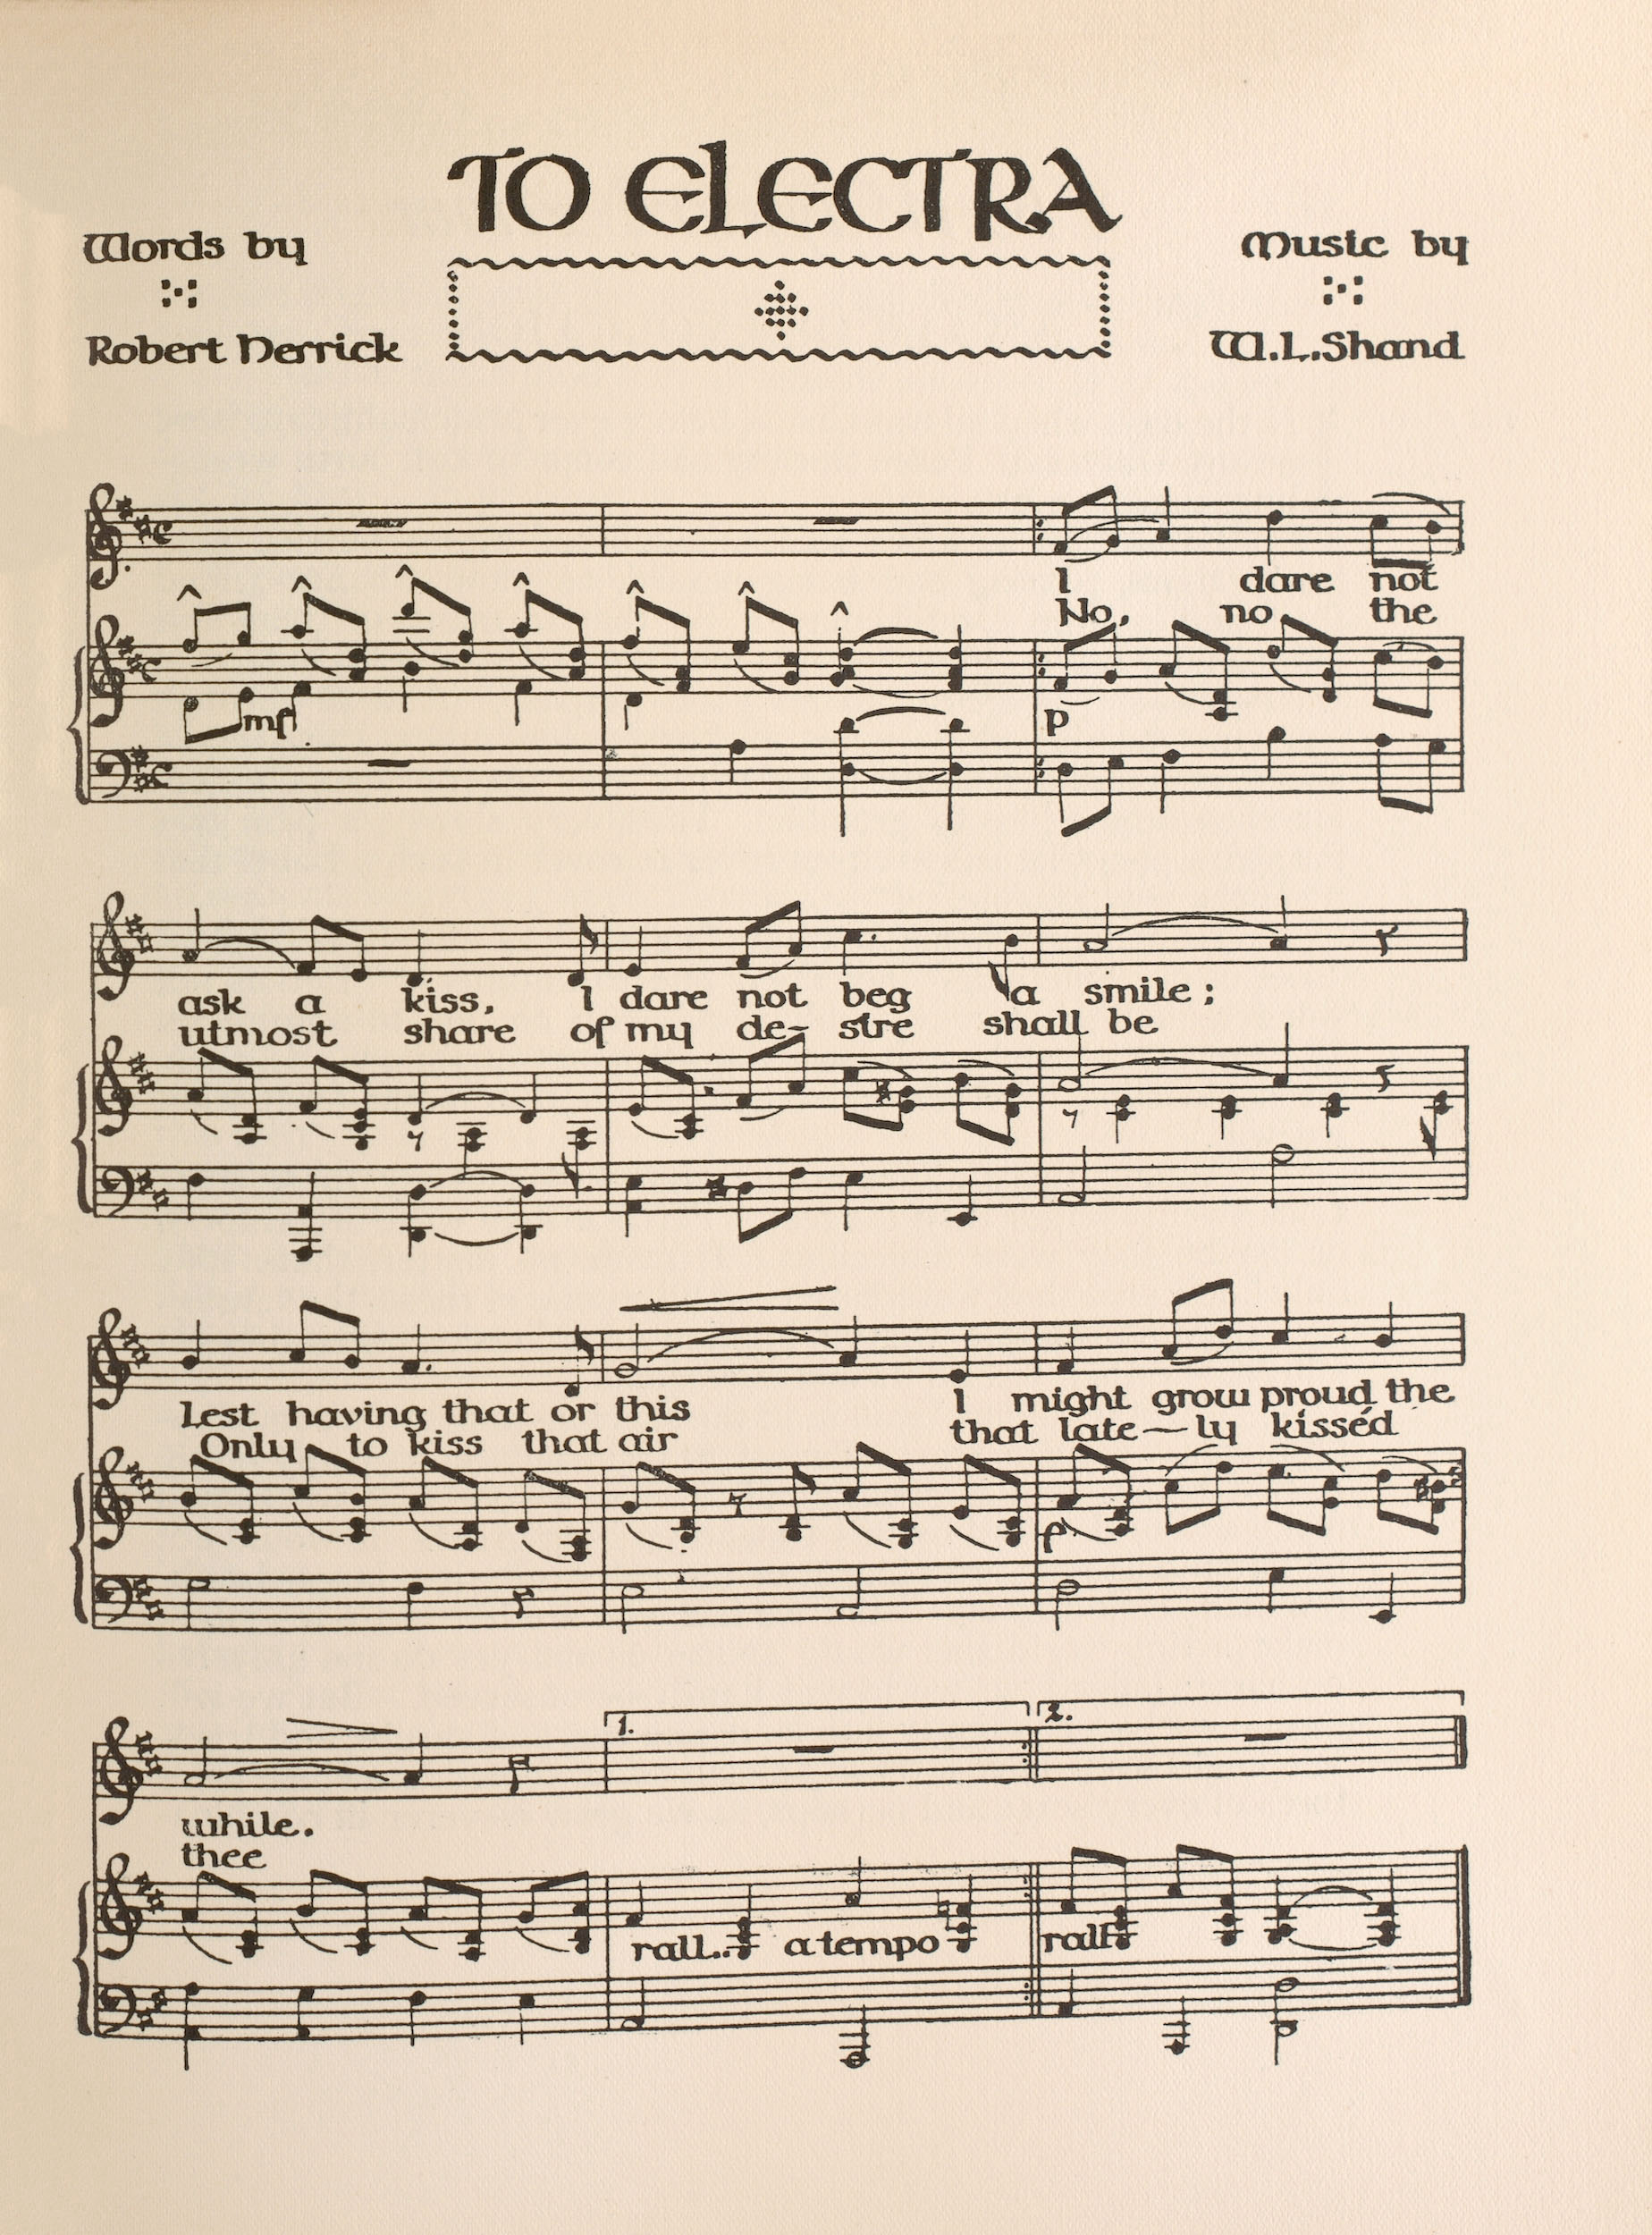 Music transcription. “To Electra,” “Words by Robert Herrick,” “Set to music by W.L. Shand,” “I dare not ask a kiss, I dare not beg a smile; lest having that or this I might grow proud the while.” “No, no the utmost share of my de-sire shall be Only to kiss that air that late-ly kissed thee,” “rall..a tempo,” “rall.”